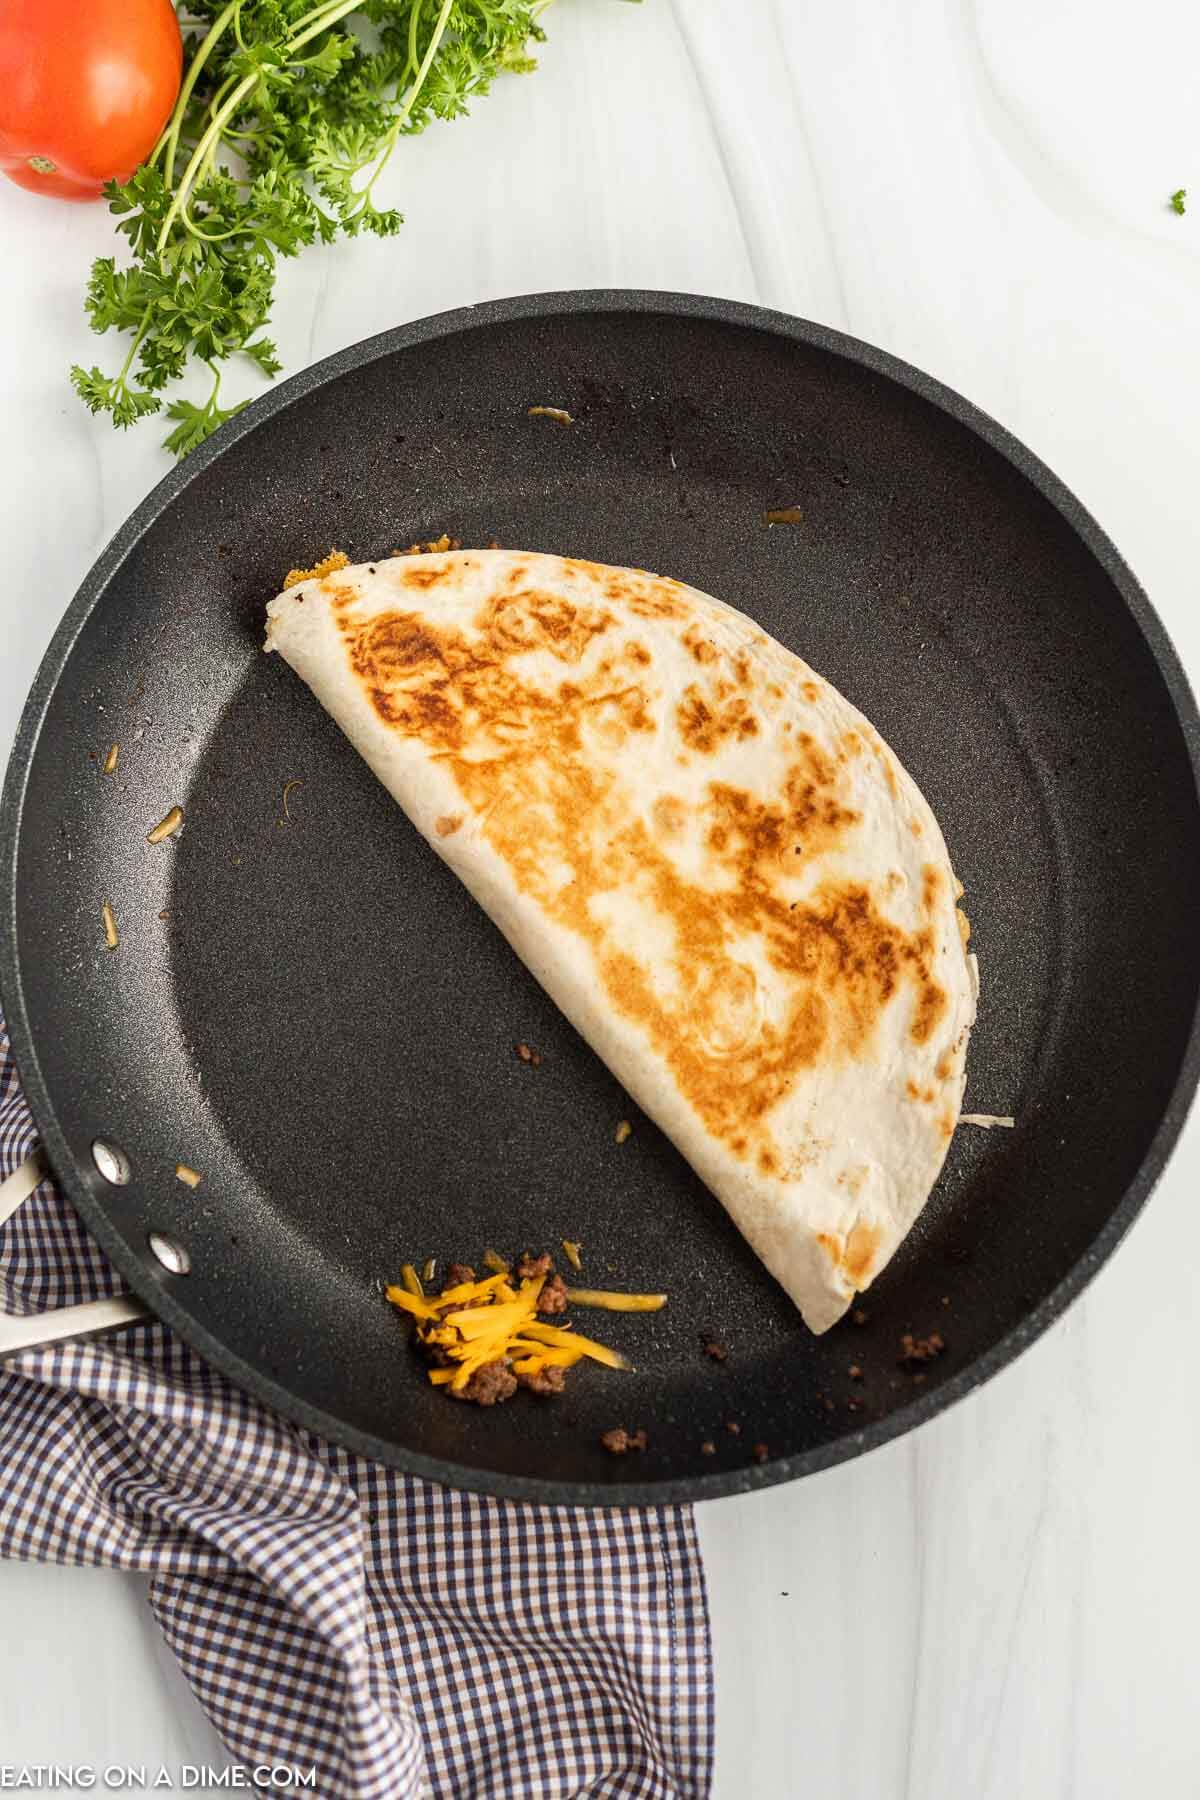 Cooking quesadilla in a skillet